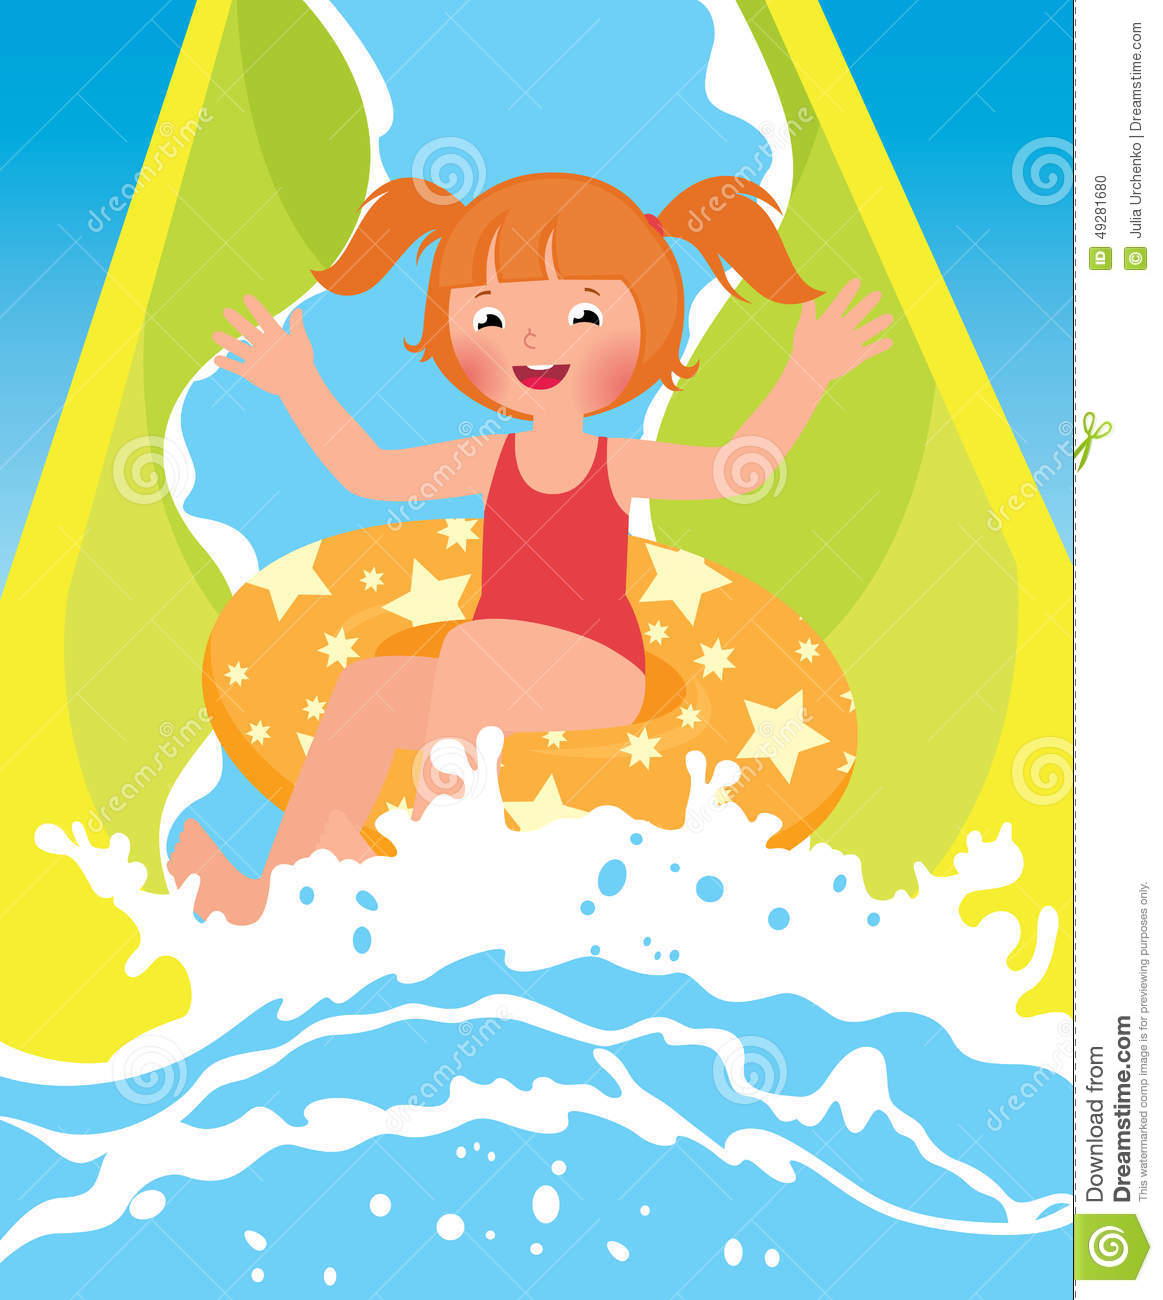 clipart water park - photo #25